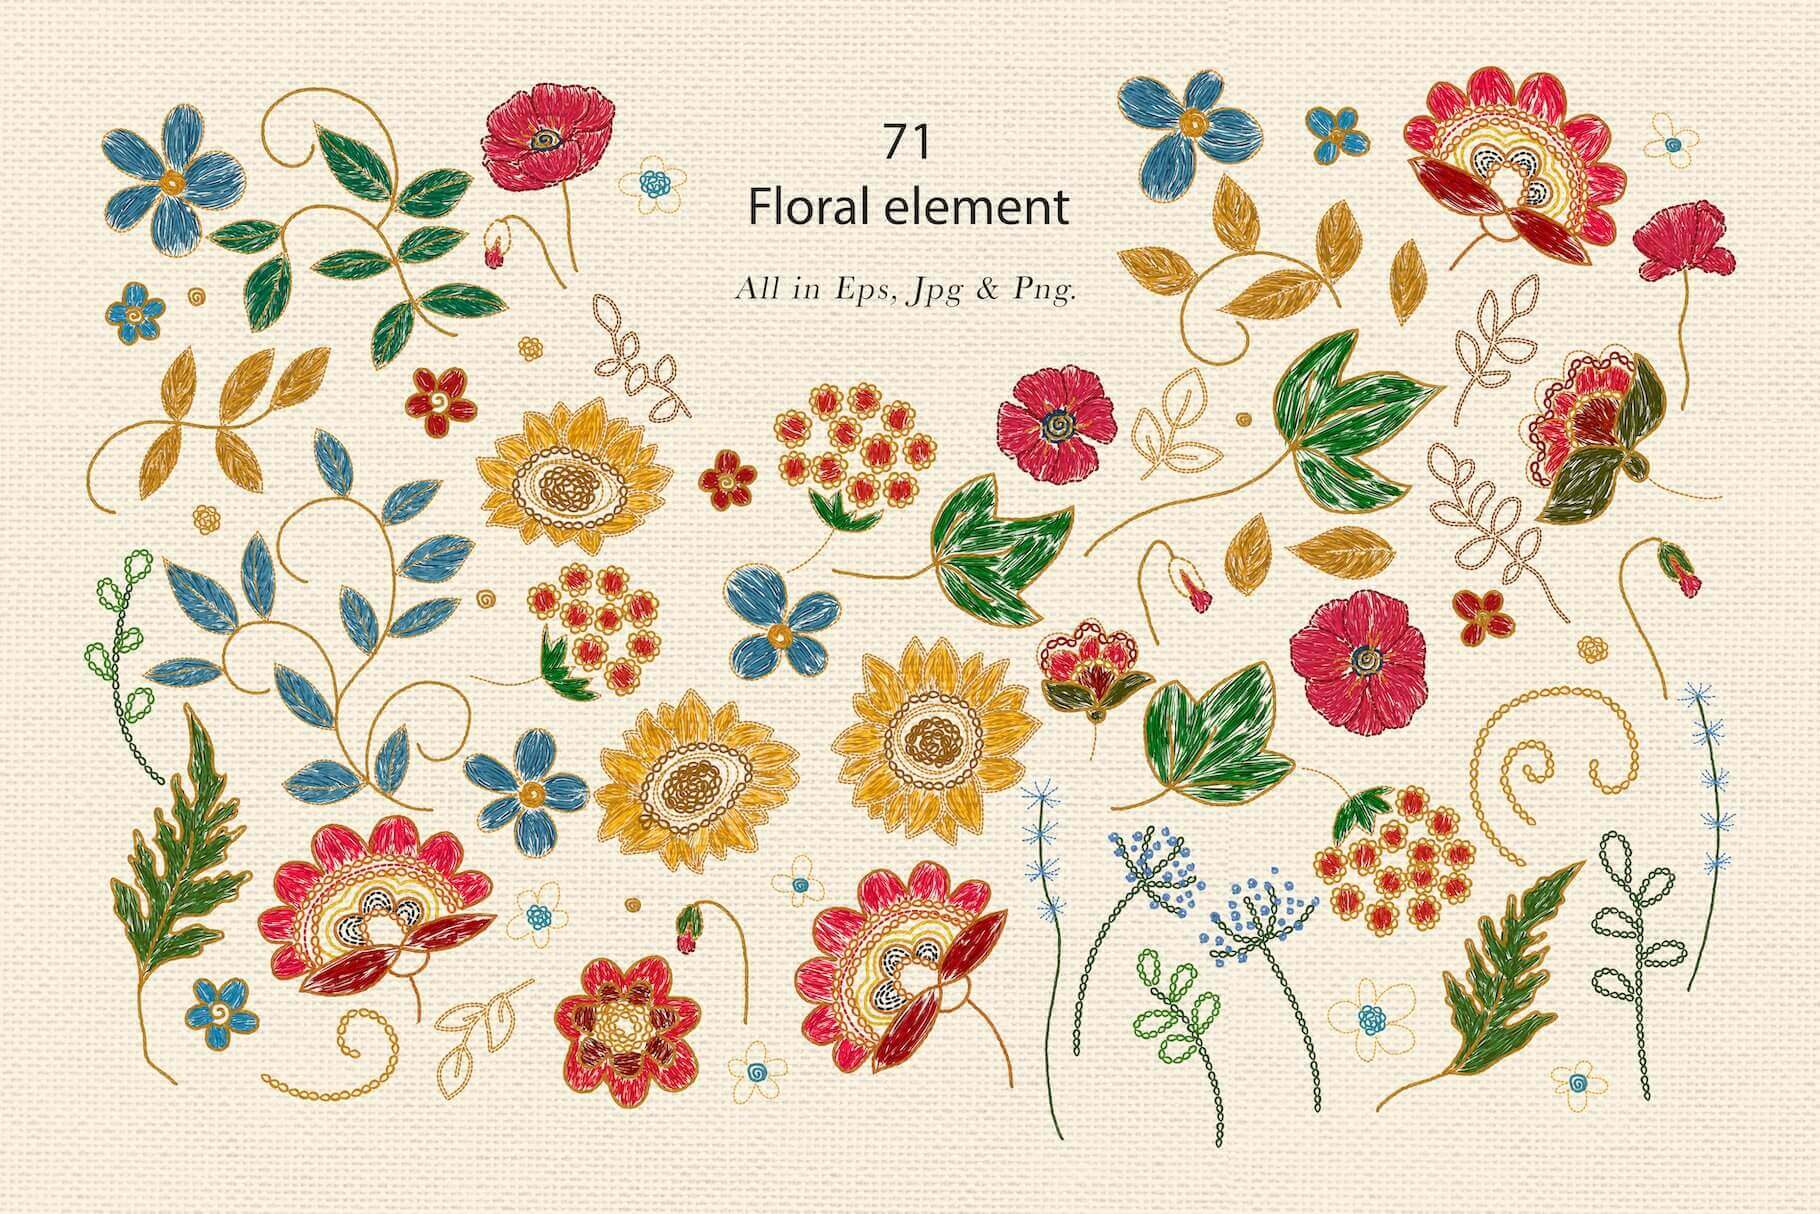 71 floral elements: flowers, leaves and other.